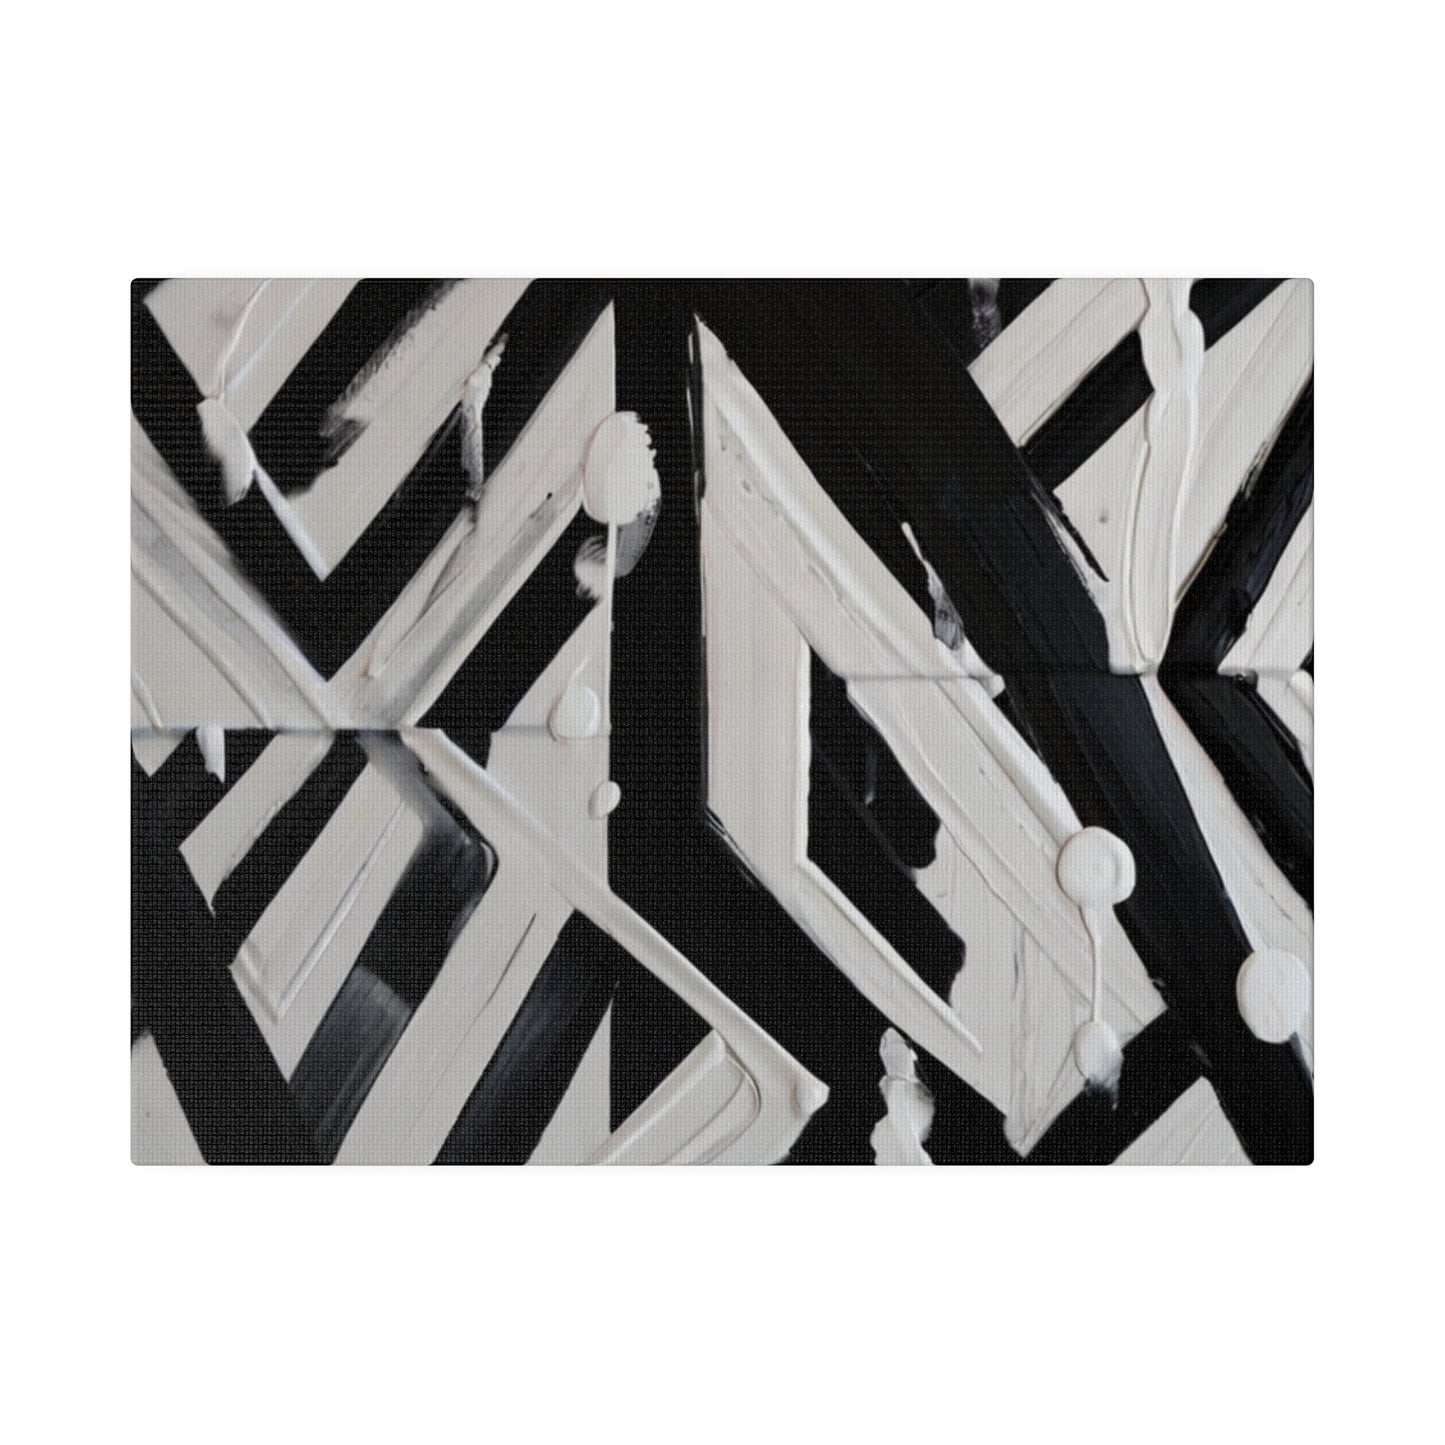 Messy Black and White Paint Lines Canvas - Matte Canvas, Stretched, 0.75"